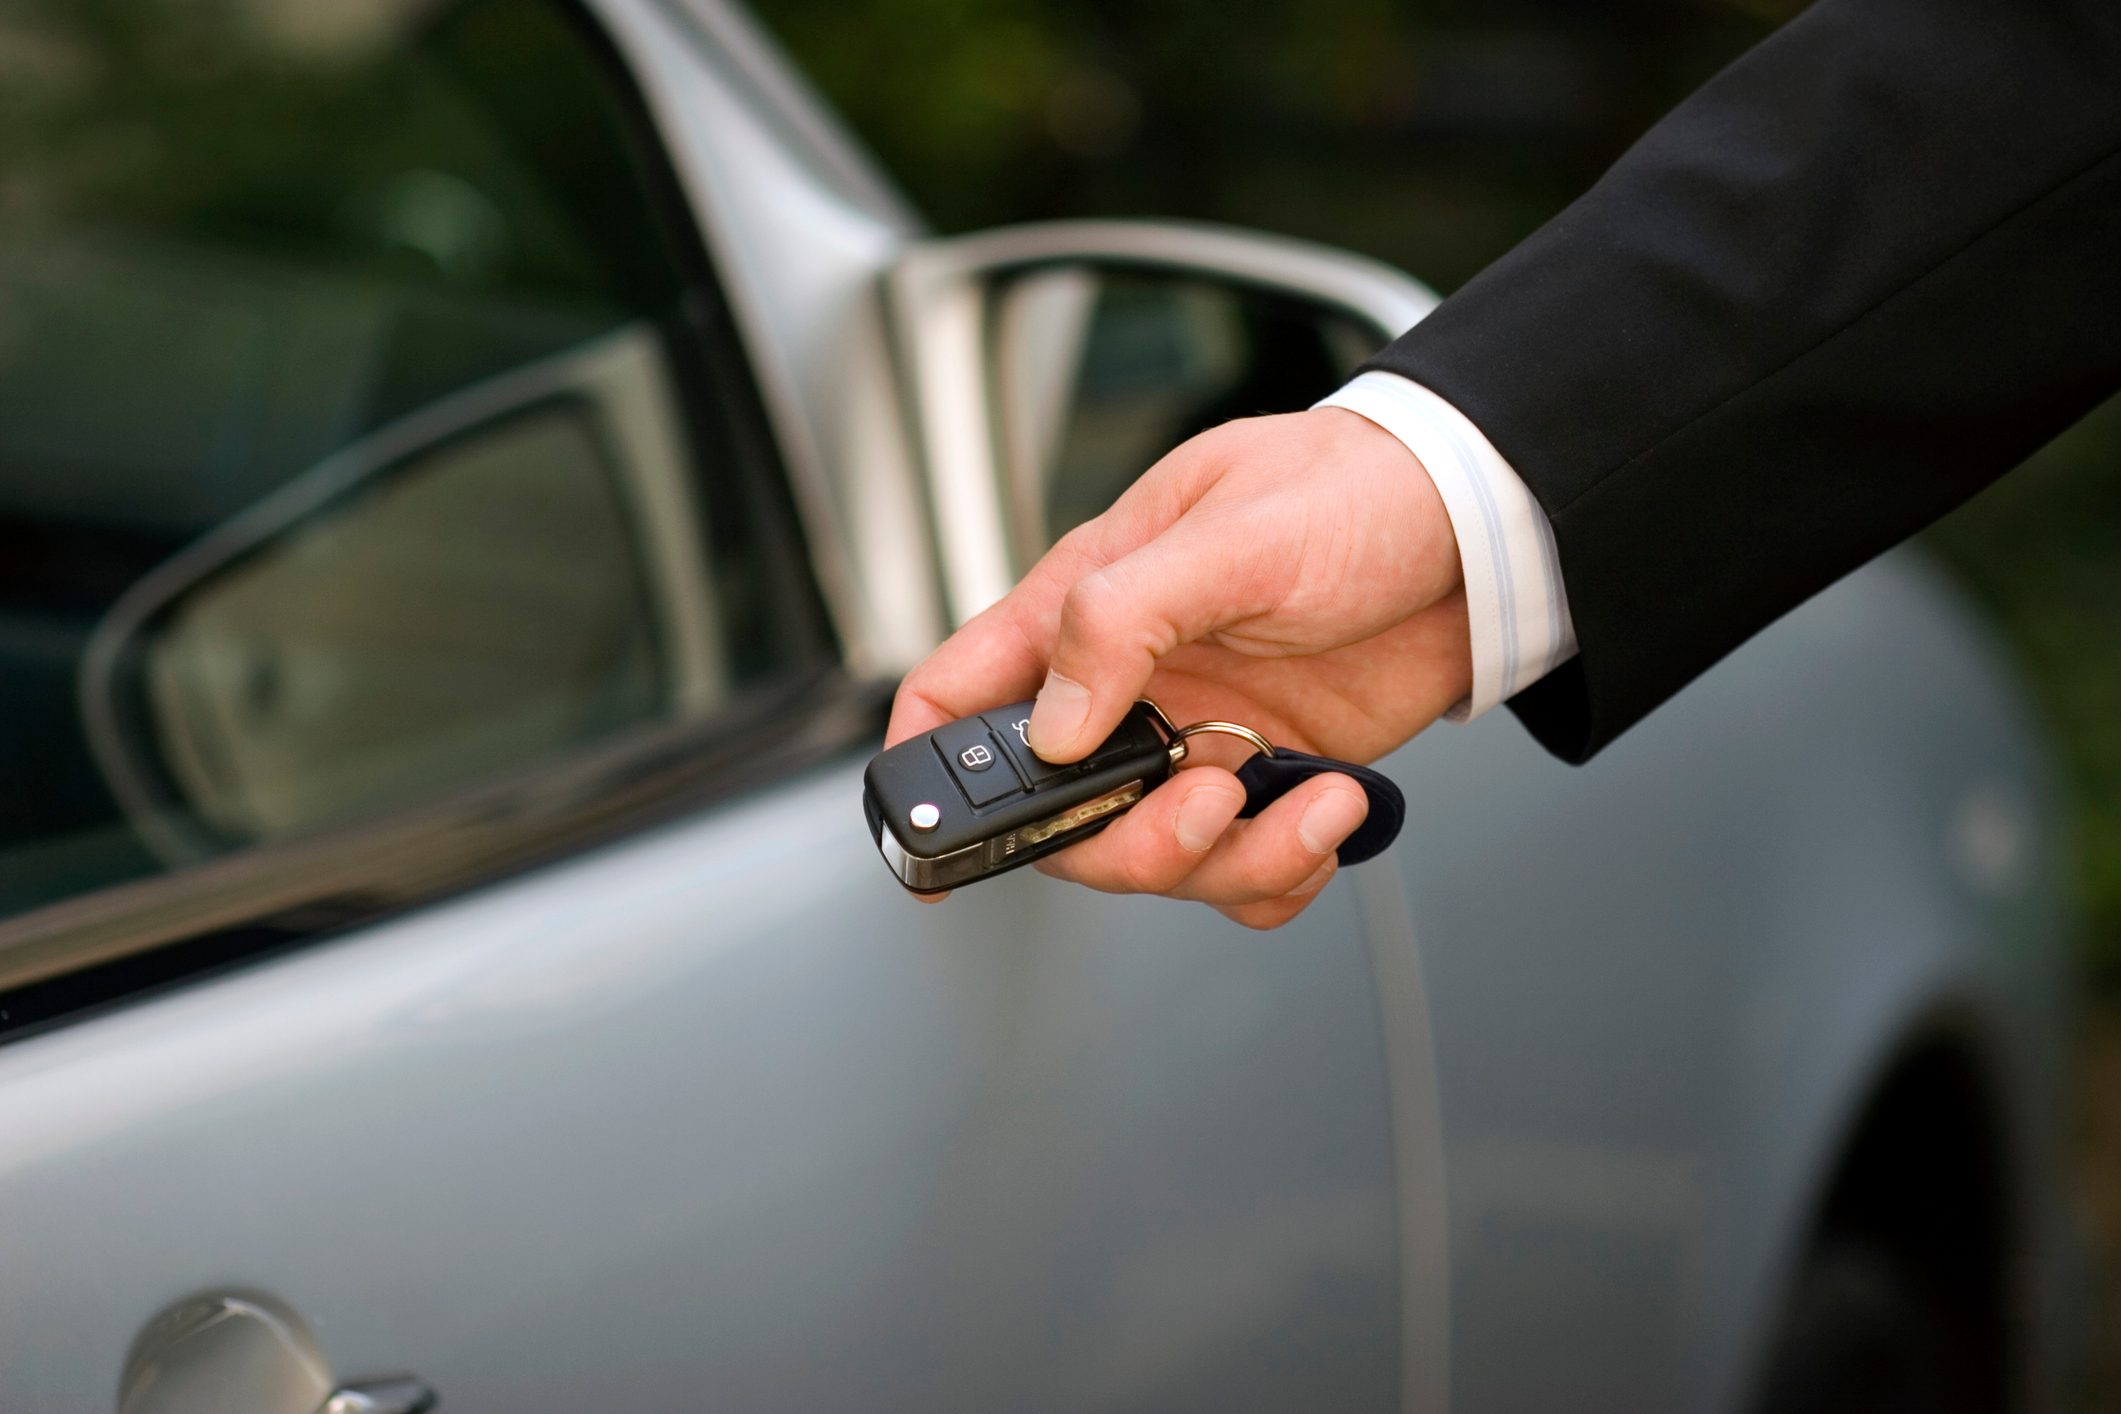 Car Keyless Entry vs Remote Keyless Entry: What's the Difference?